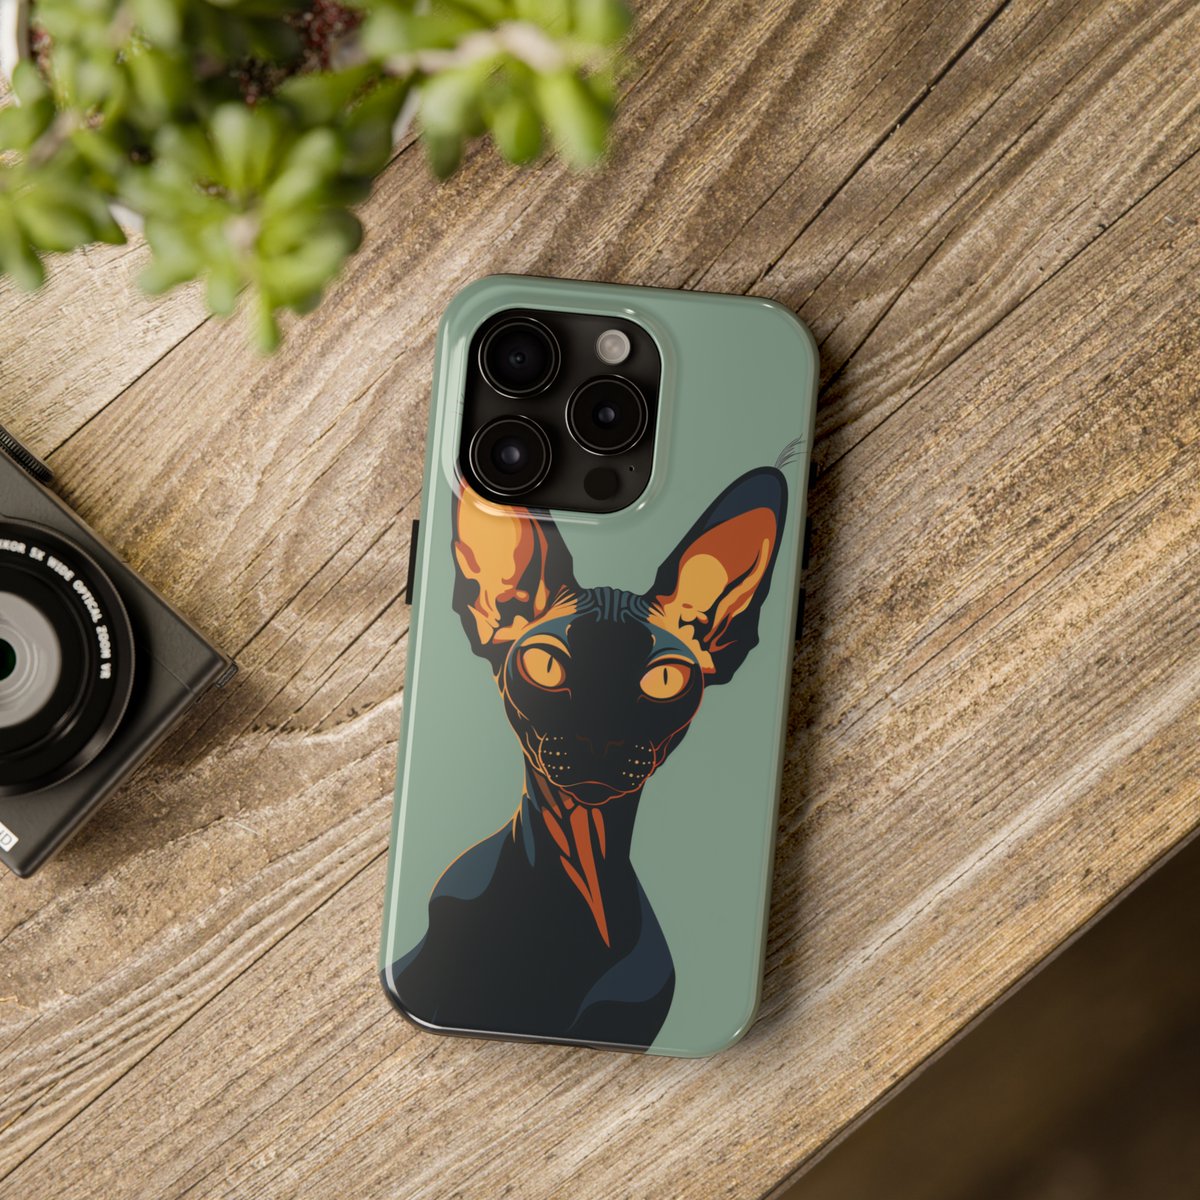 Sphynx cat phone case for iPhone 15 Pro Max, 14 Plus, 13, 12, 11, XR, X, XS, SE Mini Gift for mom dad cats lover  #phonecase #iphonecase #sphynx #sphynxcat #sphynxphonecase #sphynxiphonecase